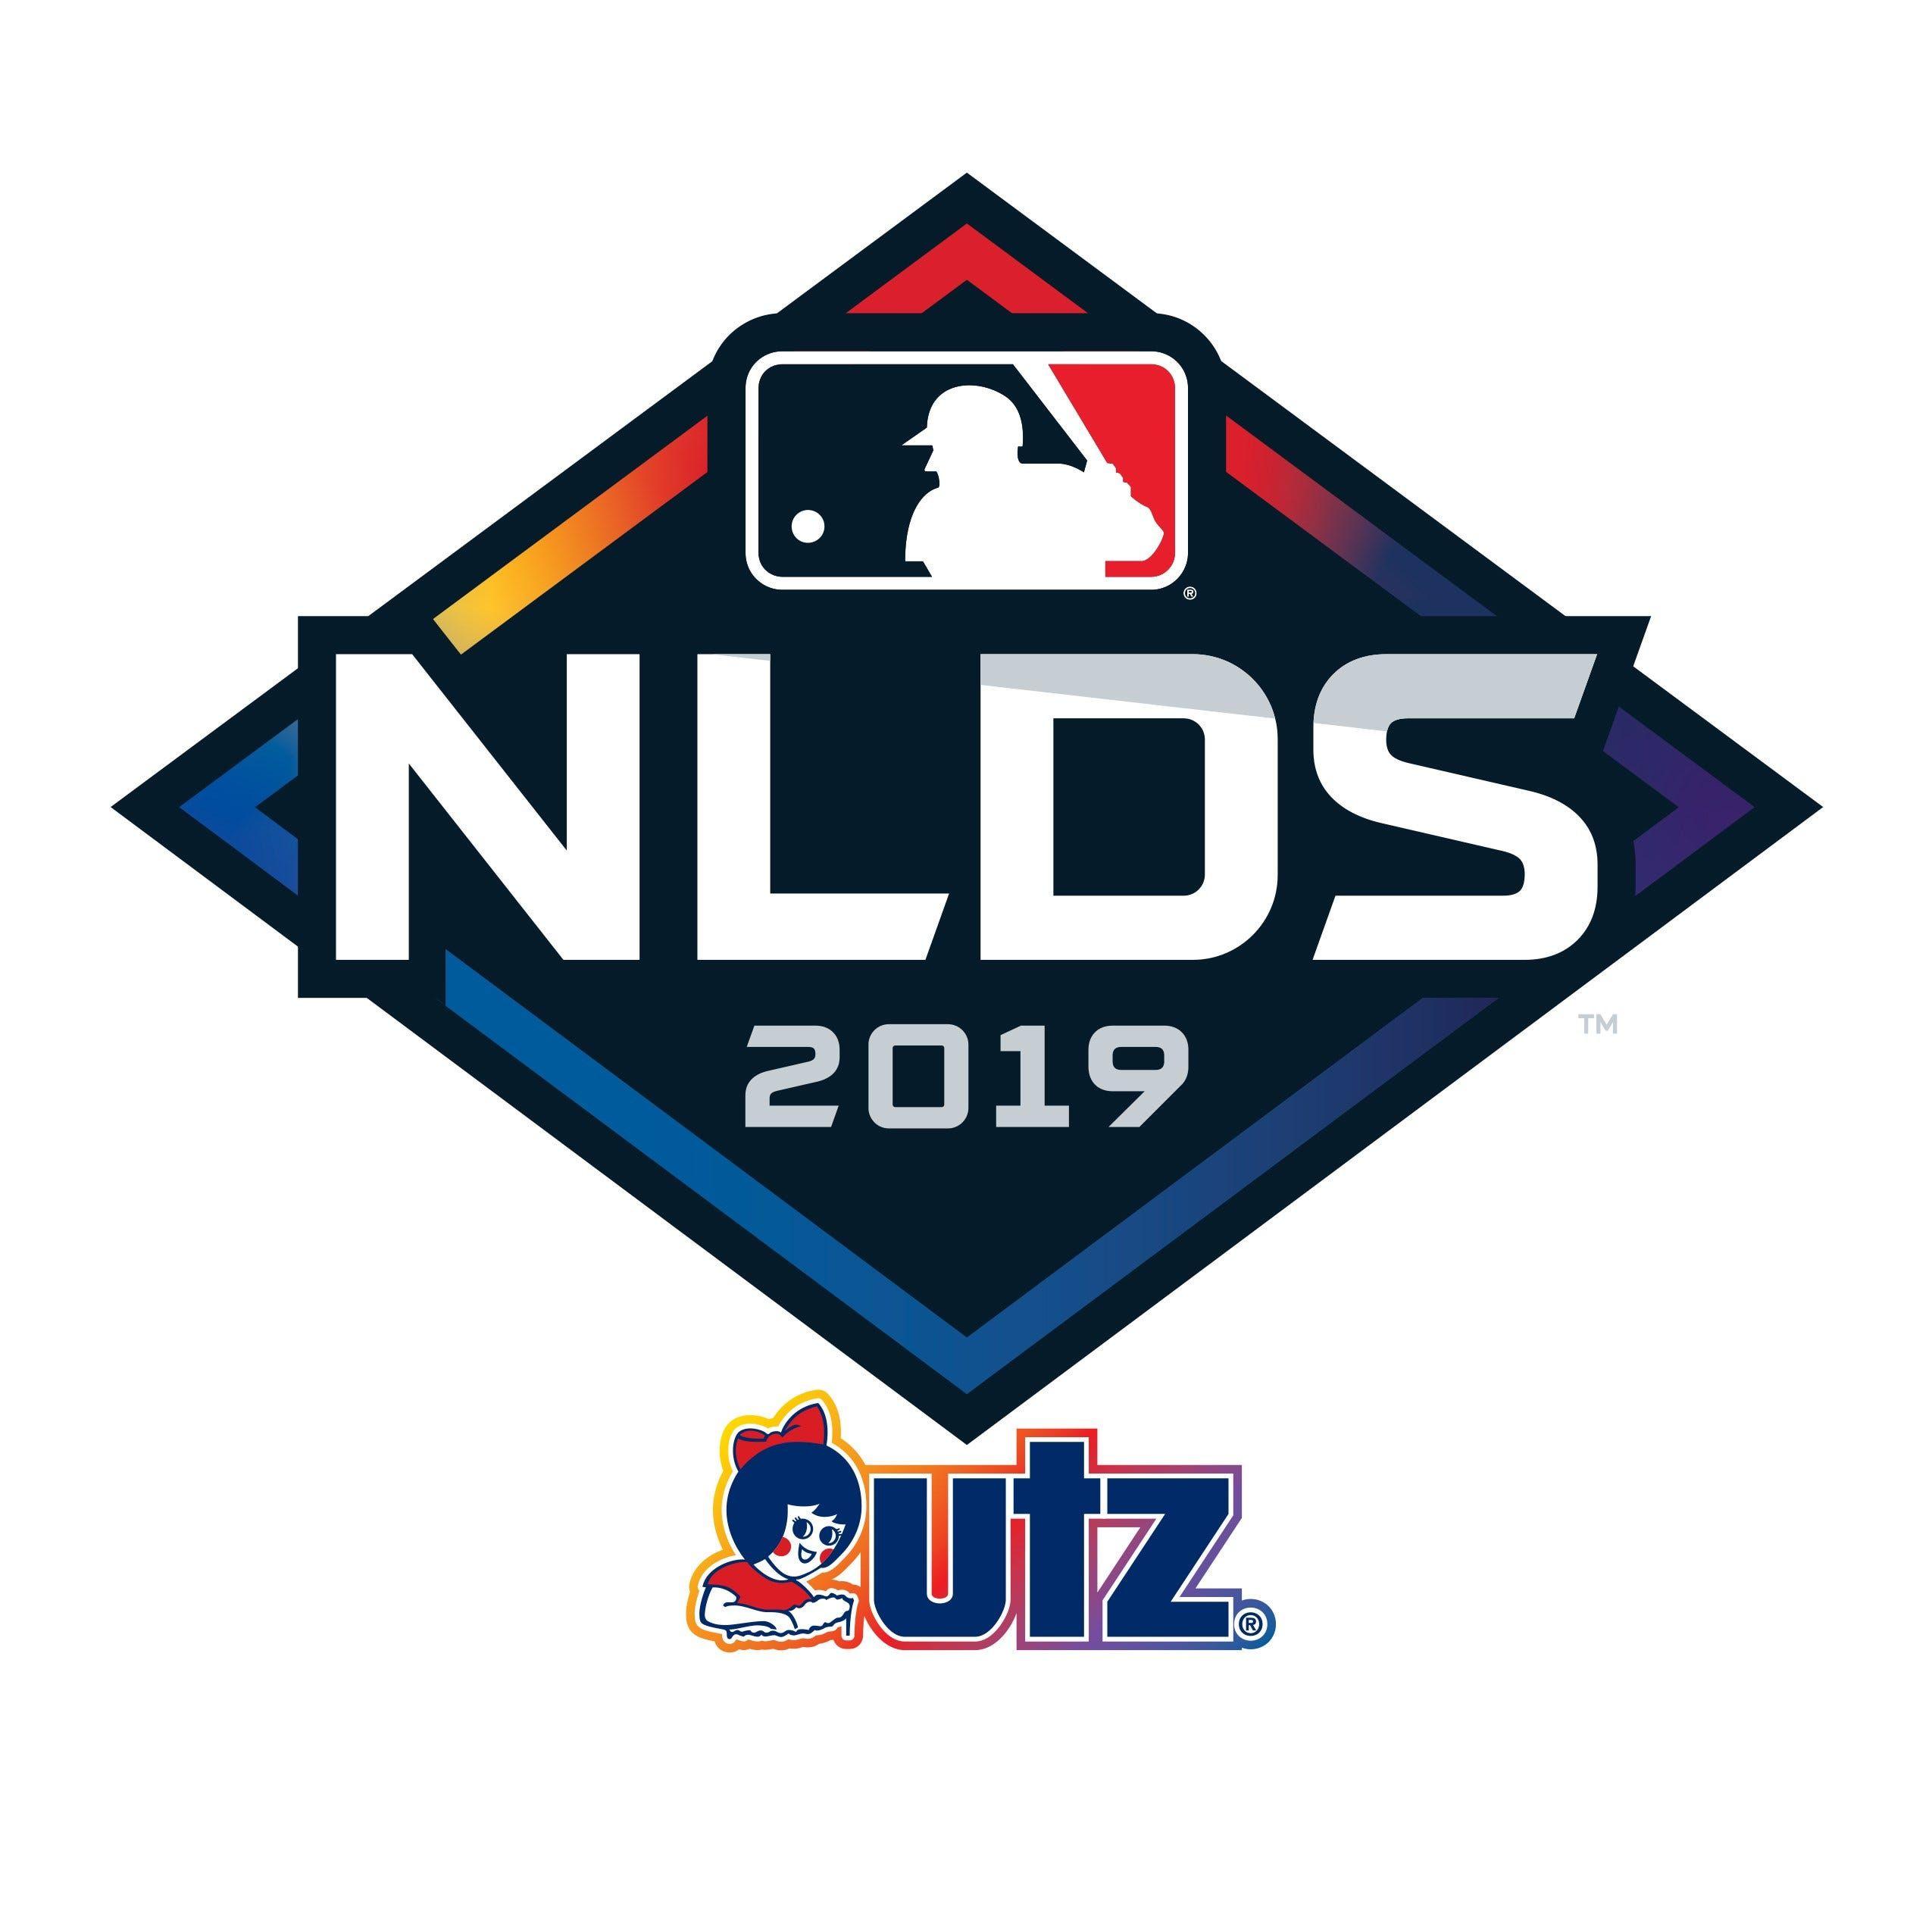 Utz Logo - Utz® To Be Presenting Sponsor of The National League Division Se